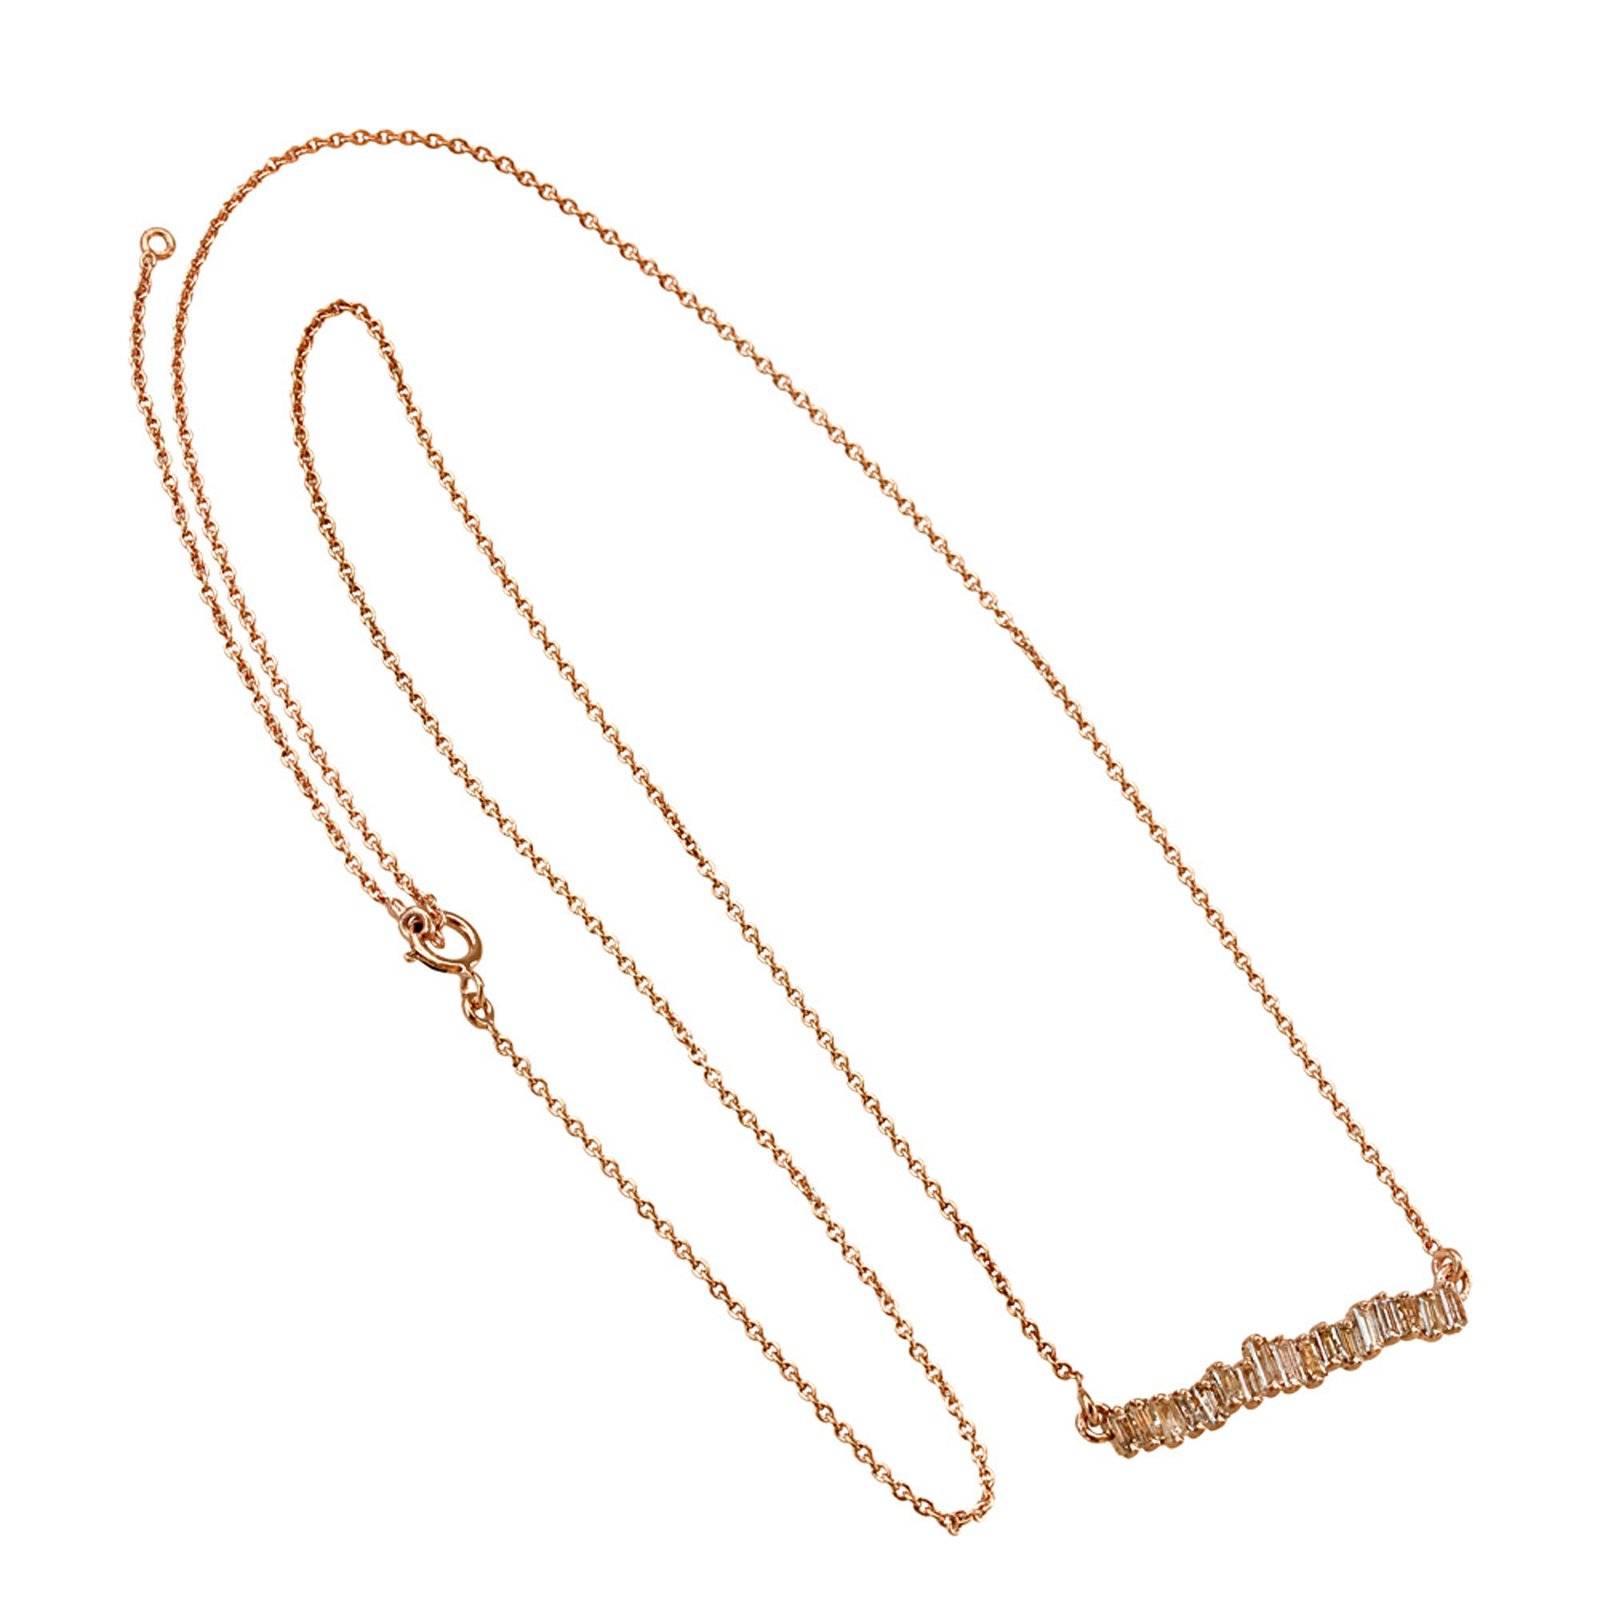 Solid 18k rose gold necklace with chain, Baguette diamond jewelry